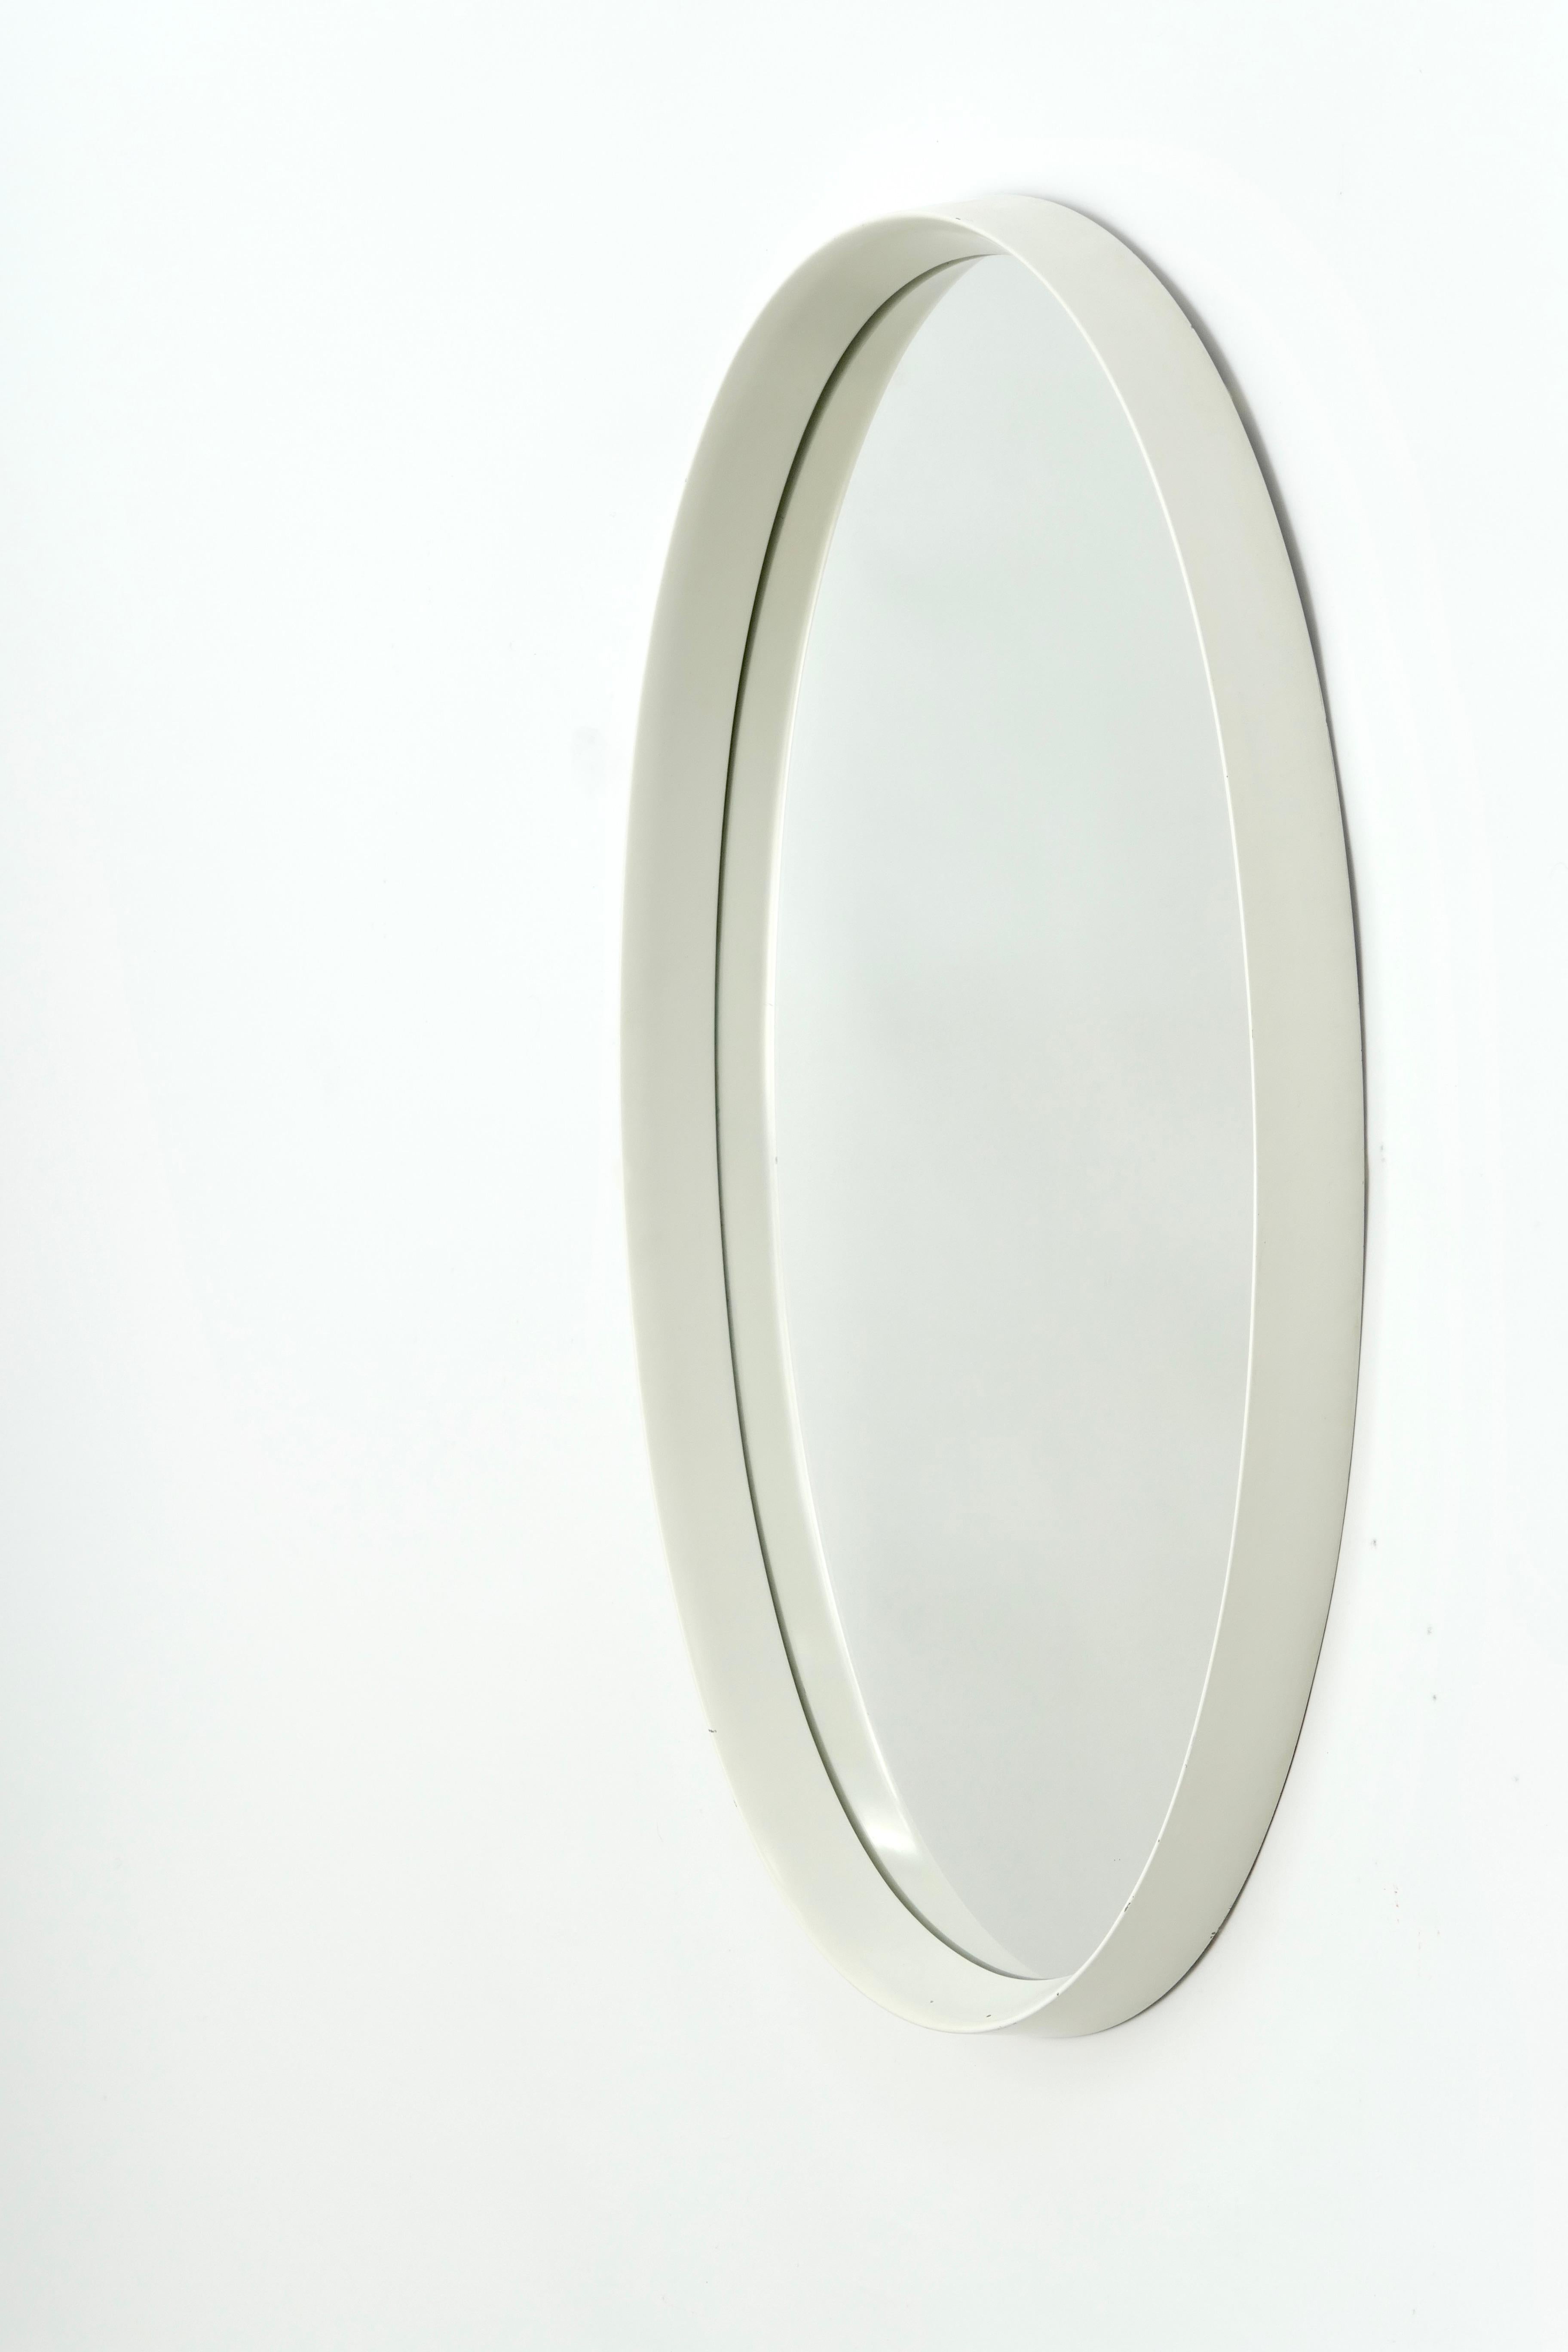 Late 20th Century Set of Two Oval Mirrors with a Wood White Lacquered Frame, Germany, 1970s